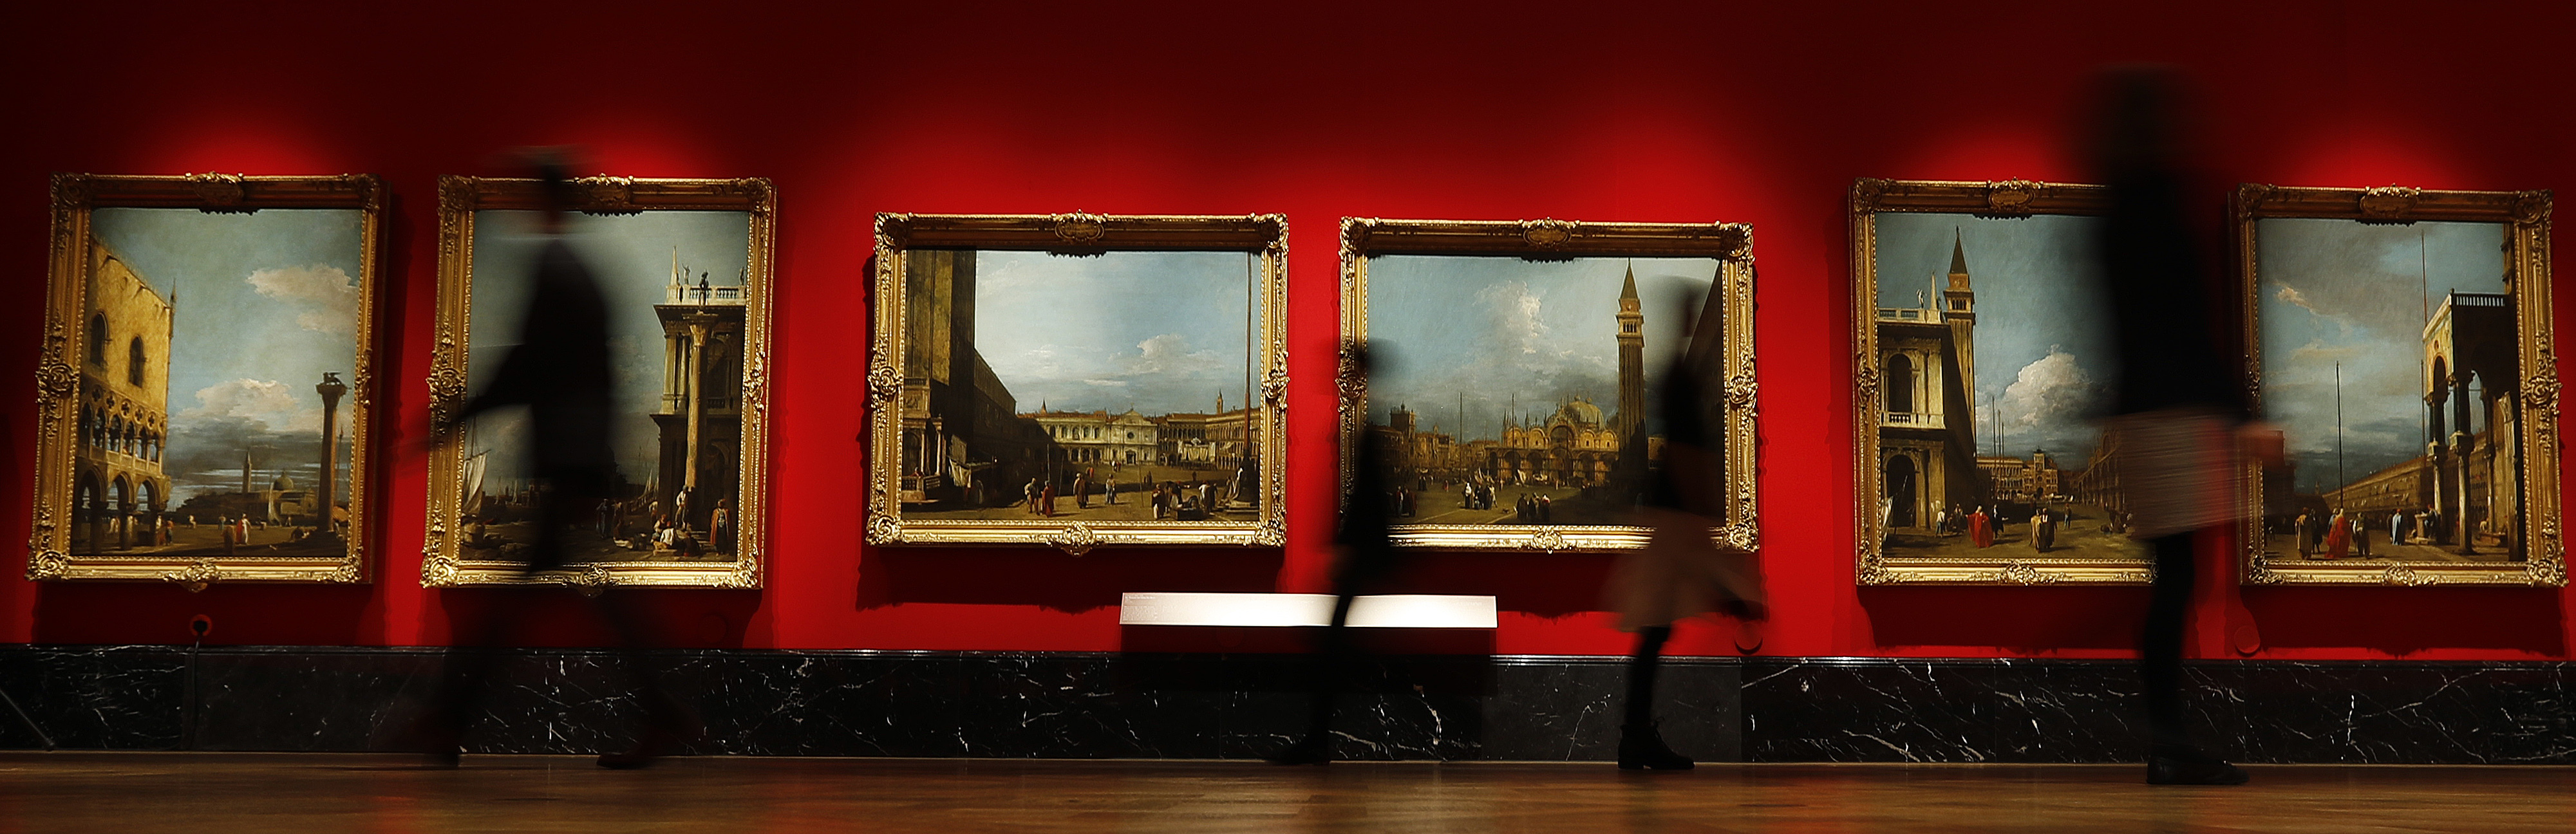 People walk past Canaletto's paintings of Venice views at the Queen's Gallery at Buckingham Palace in London, Thursday, May 18, 2017. A new exhibition reunites two of Canaletto's finest sets of paintings, displayed side by side for the first time in almost 40 years. Canaletto & the Art of Venice is opening on May19, at The Queen's Gallery, Buckingham Palace.(AP Photo/Frank Augstein)